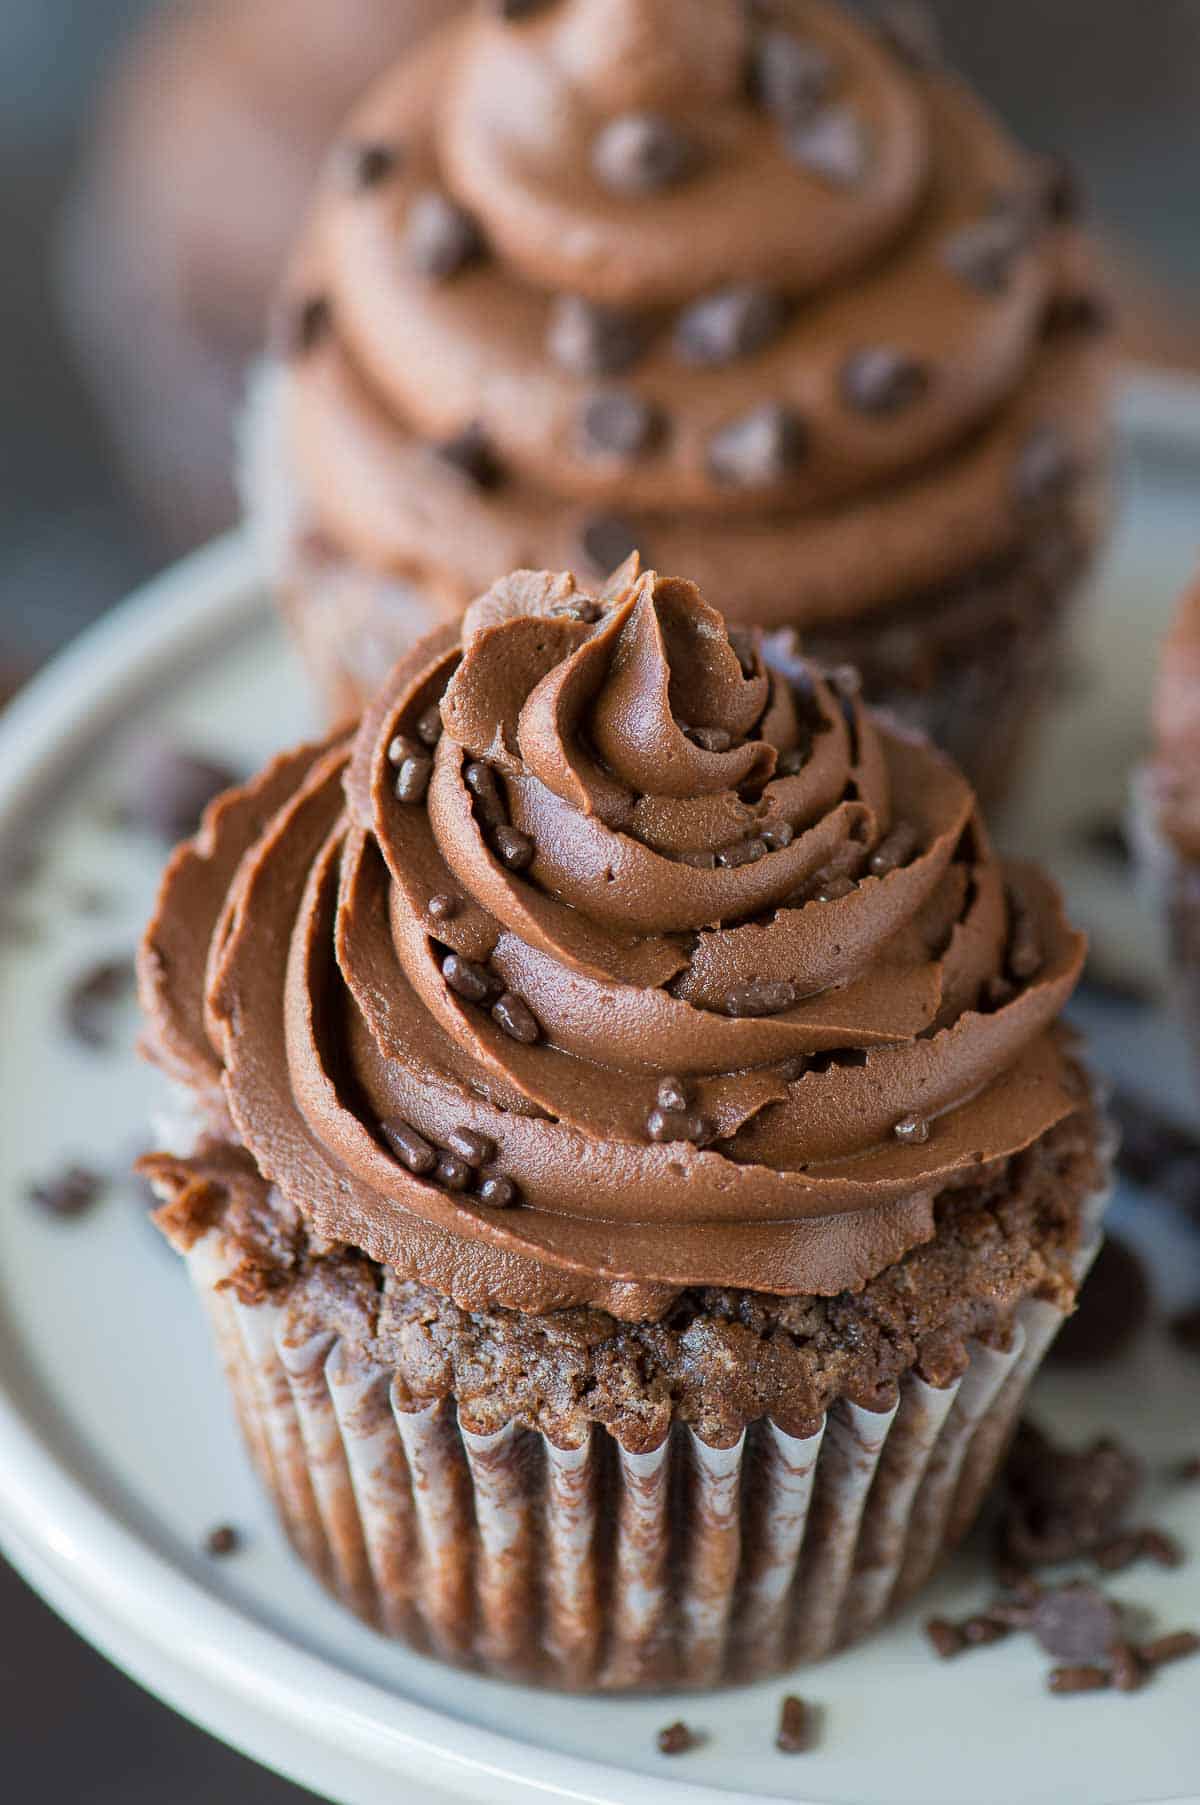 chocolate cupcake with chocolate frosting on gray cake stand